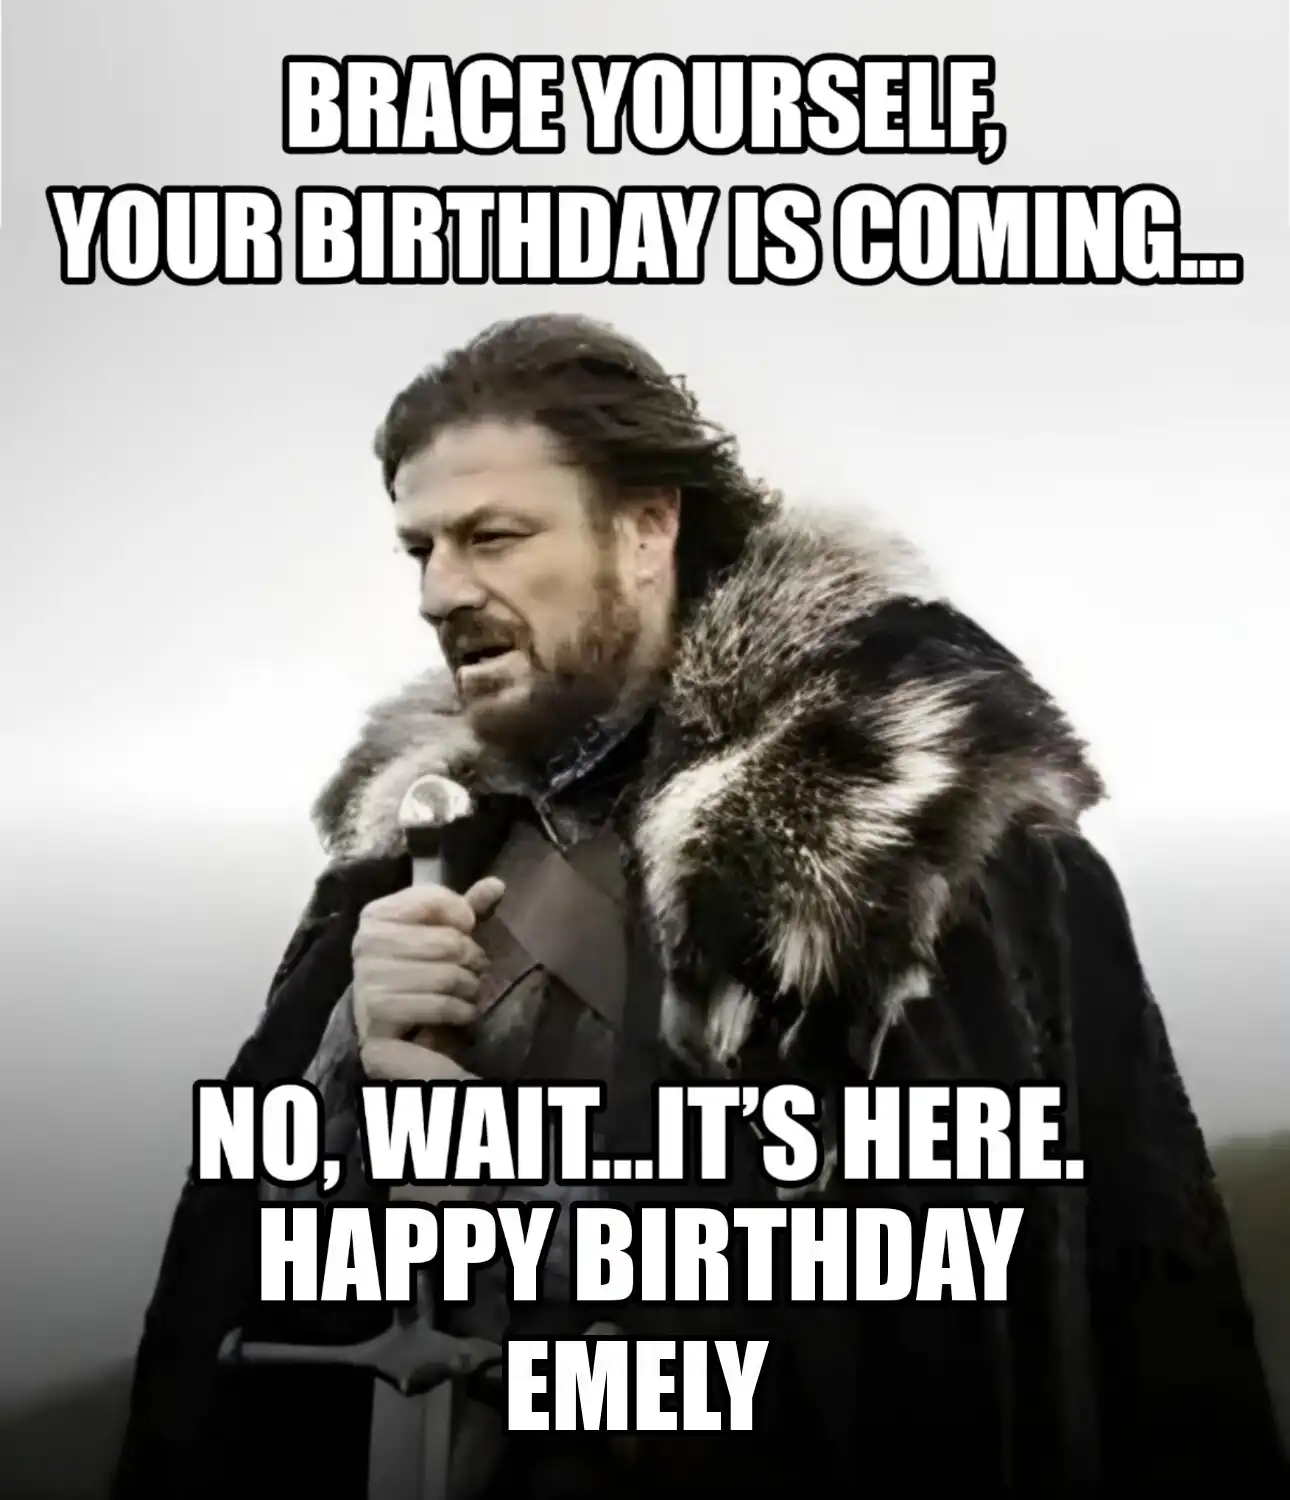 Happy Birthday Emely Brace Yourself Your Birthday Is Coming Meme